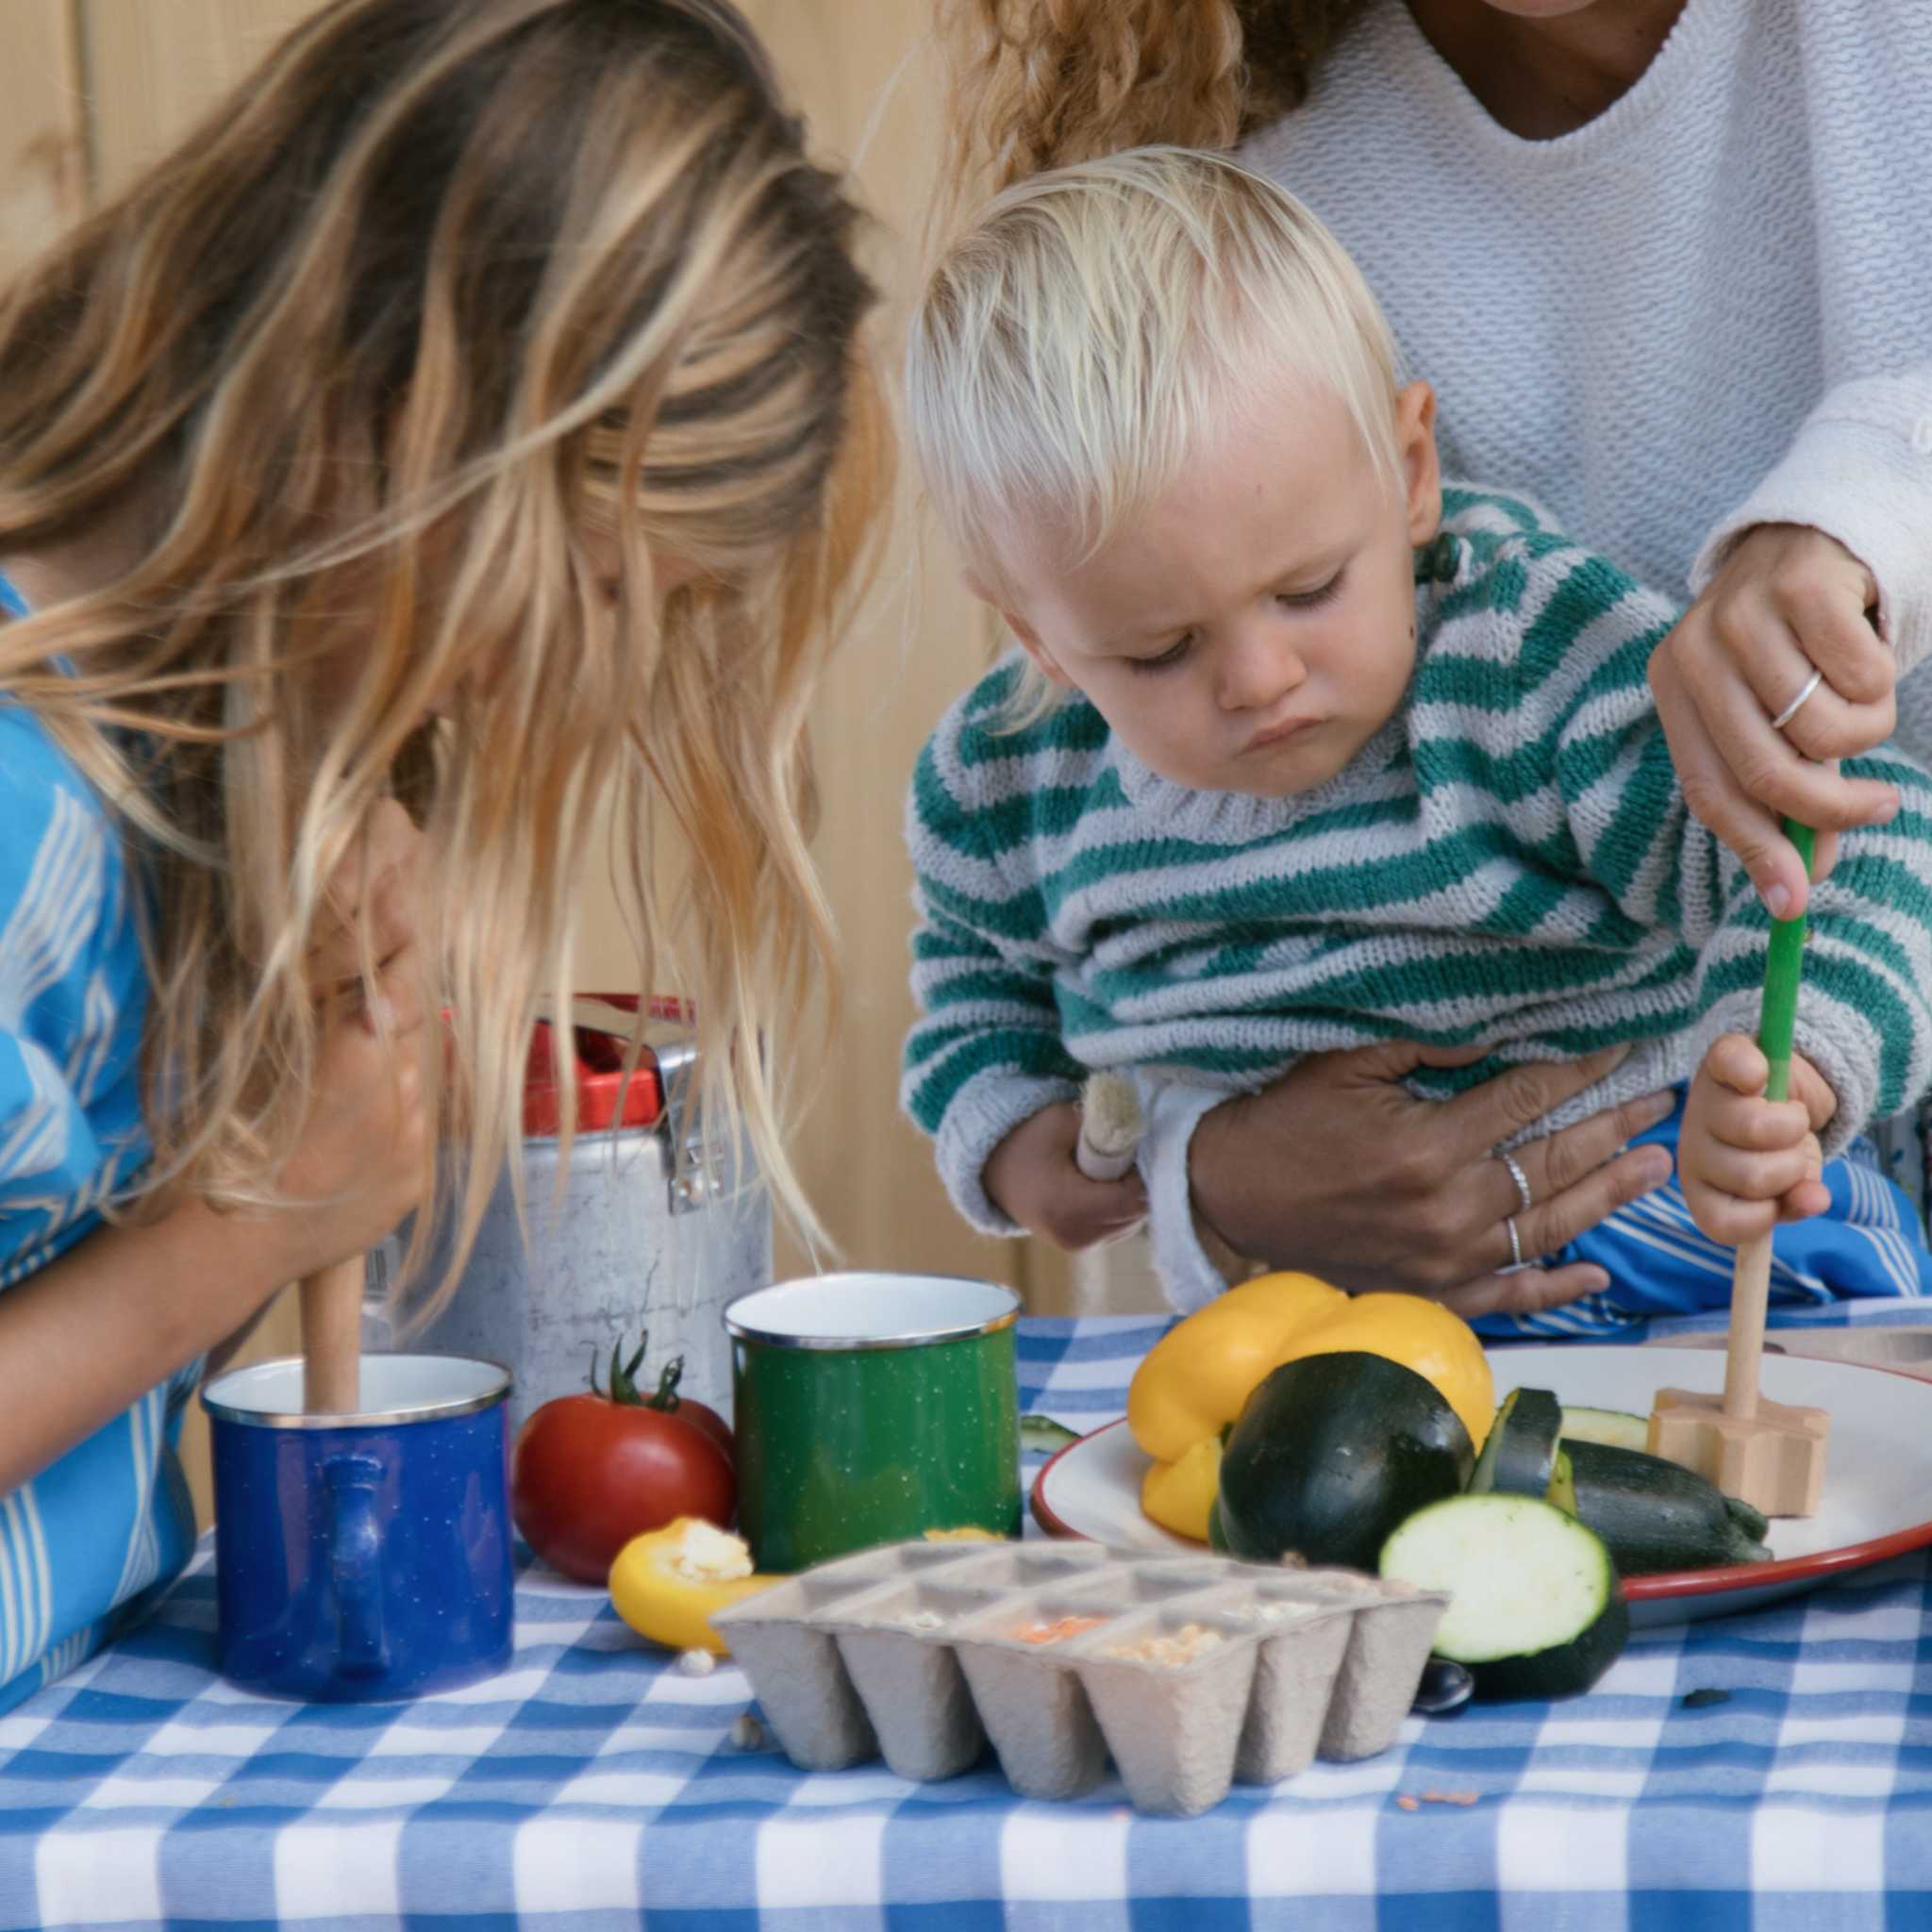 Children Playing With Grapat Tools And Food 